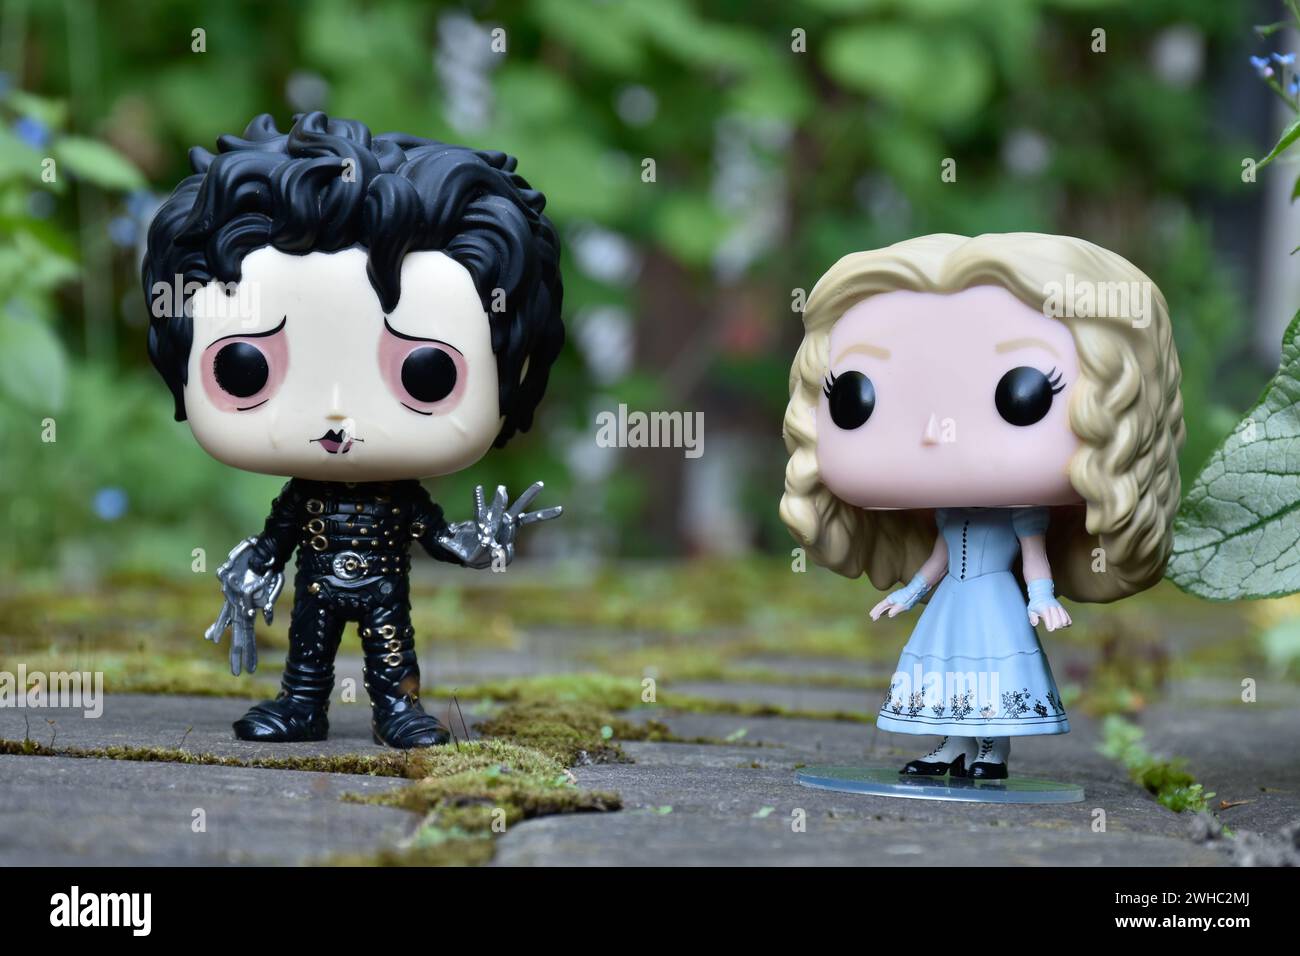 Funko Pop action figures of Edward Scissorhands and Alice in Wonderland from Tim Burton fantasy movies. Moody garden, green leaves, moss, flowers. Stock Photo